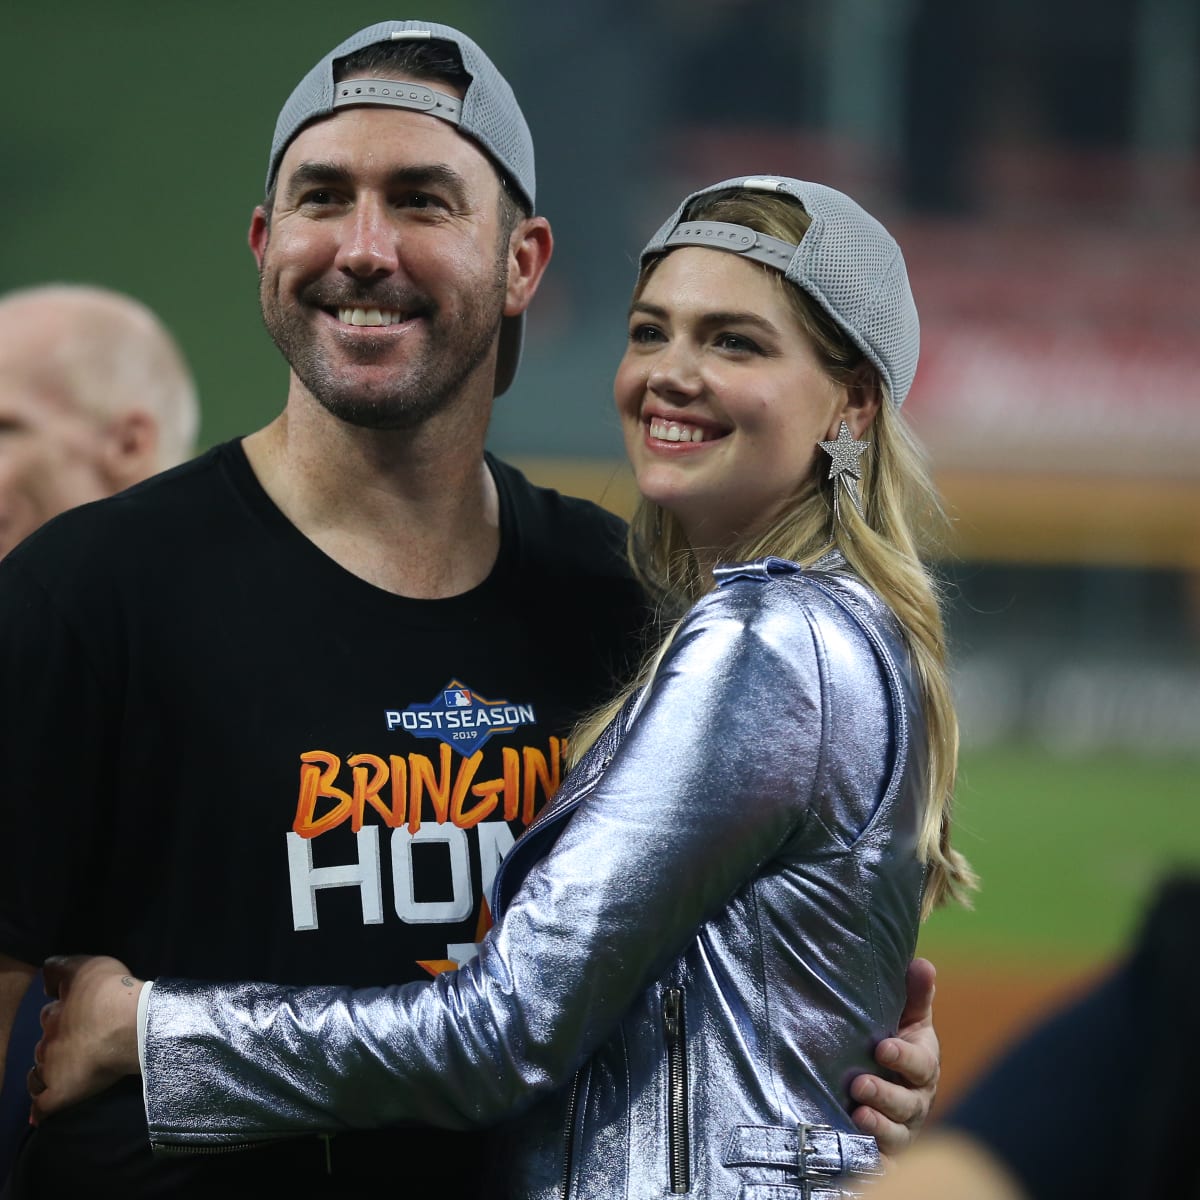 A color, born digital image of Justin Verlander #35 of the Houston Astros  smiling for a photo with his fiancé, American model and actress Kate Upton,  and the game worn jersey that